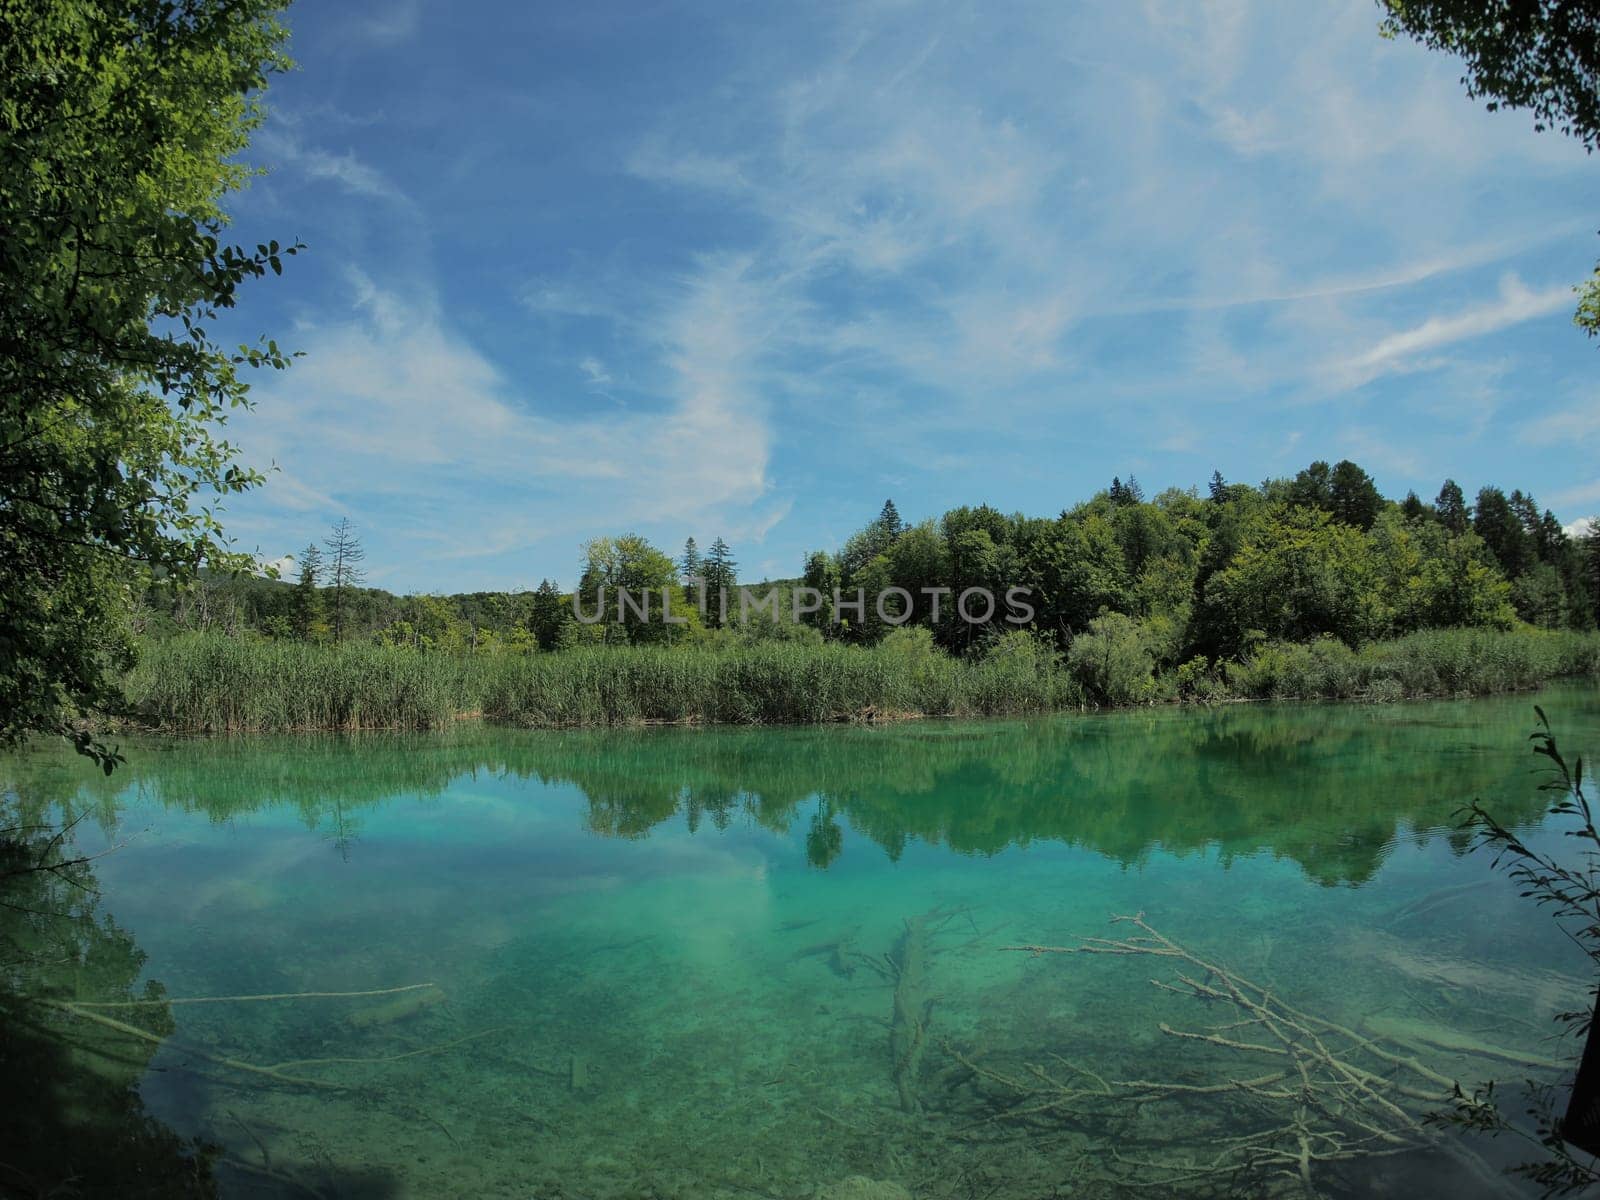 A Summer view of water lakes and beautiful waterfalls in Plitvice Lakes National Park, Croatia